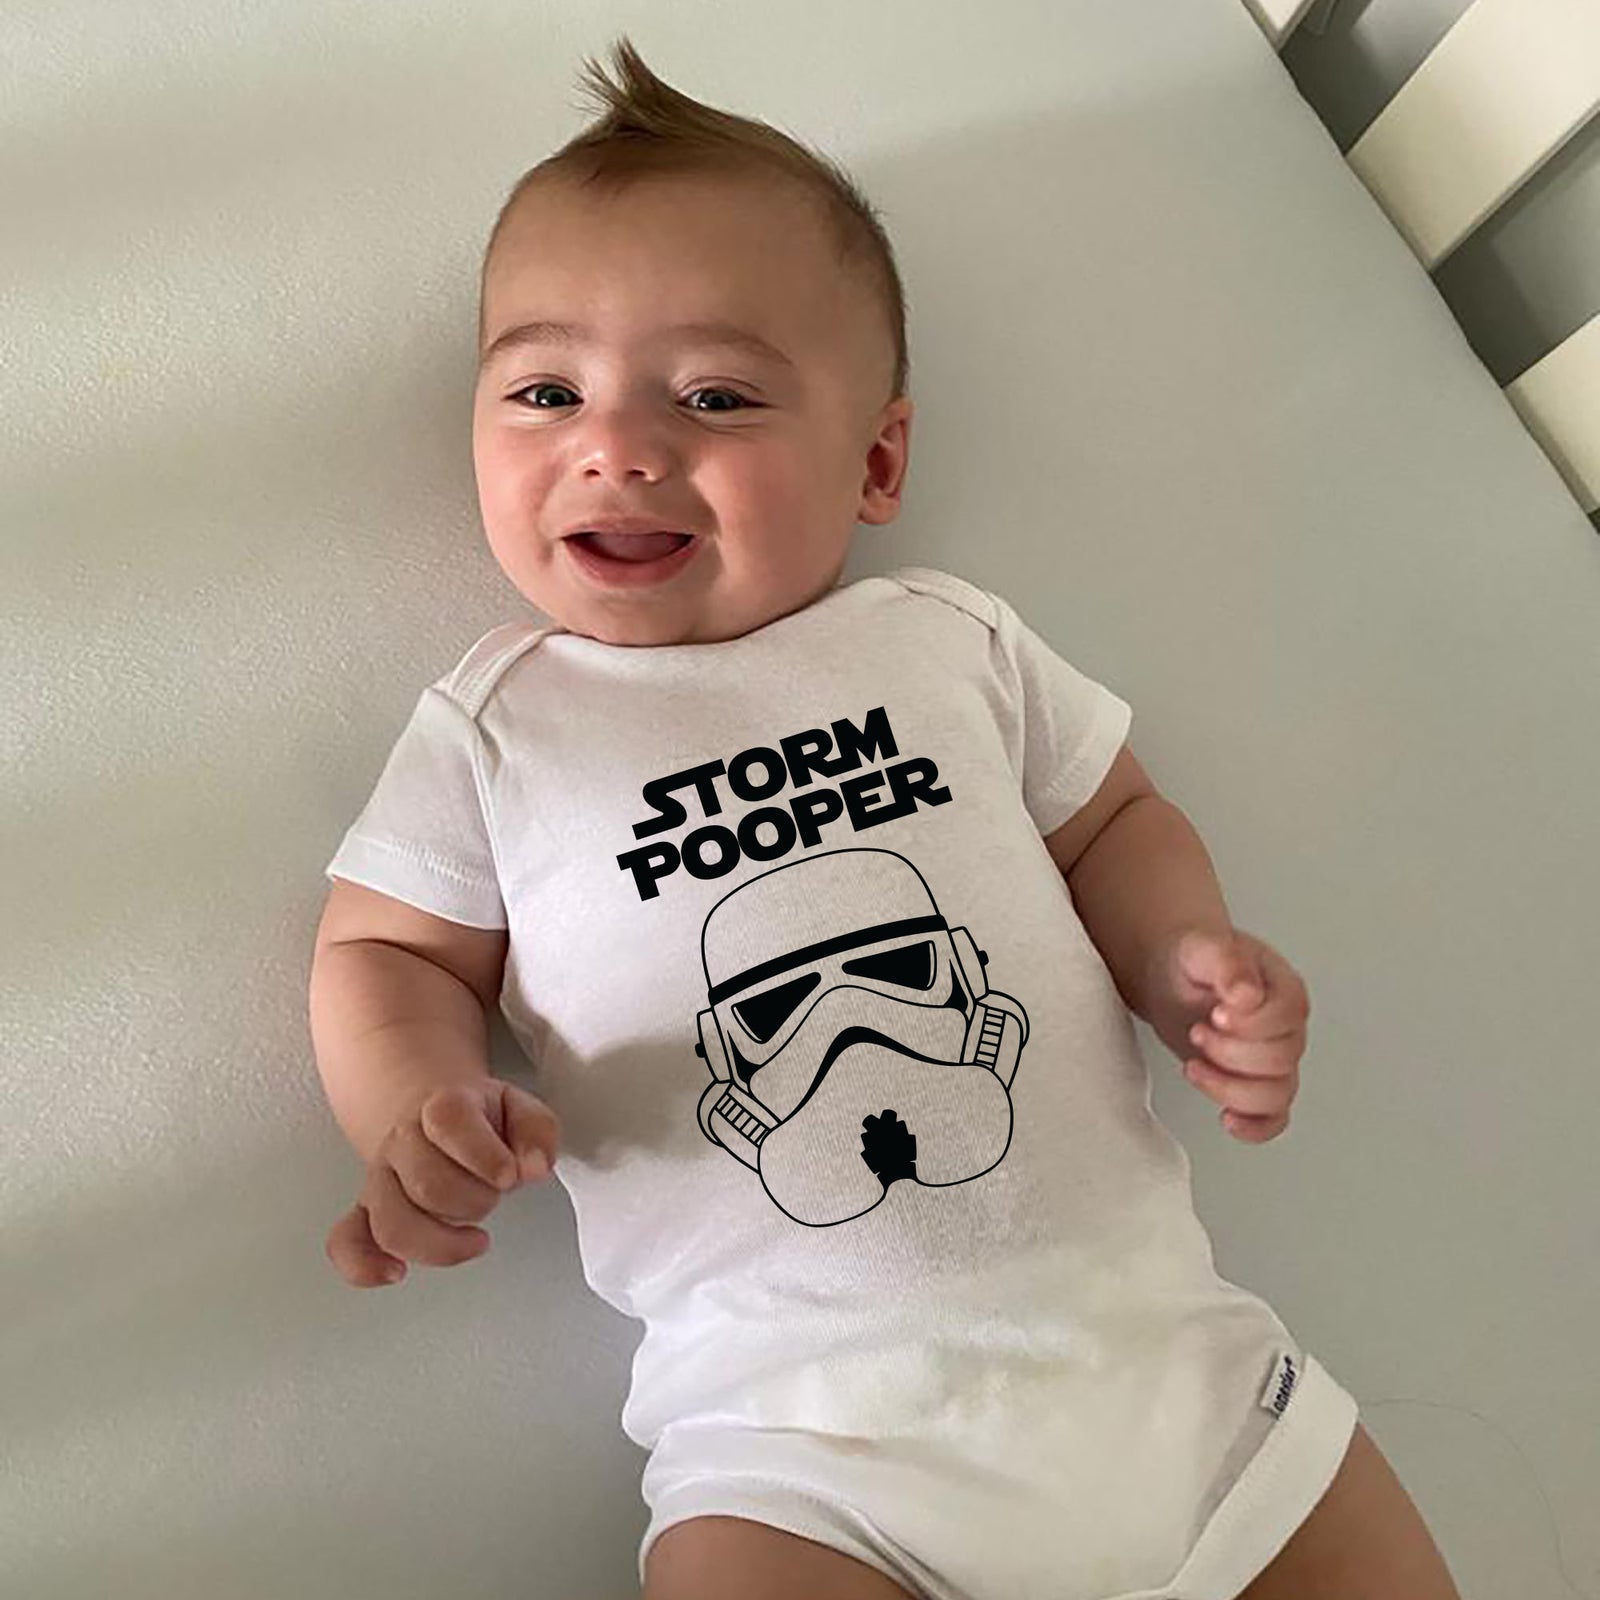 Storm Pooper and Dark Side Onesie - Funny Baby Onesie - Infant Joke Onesie - Baby Humor Onesie - Star Wars Themed